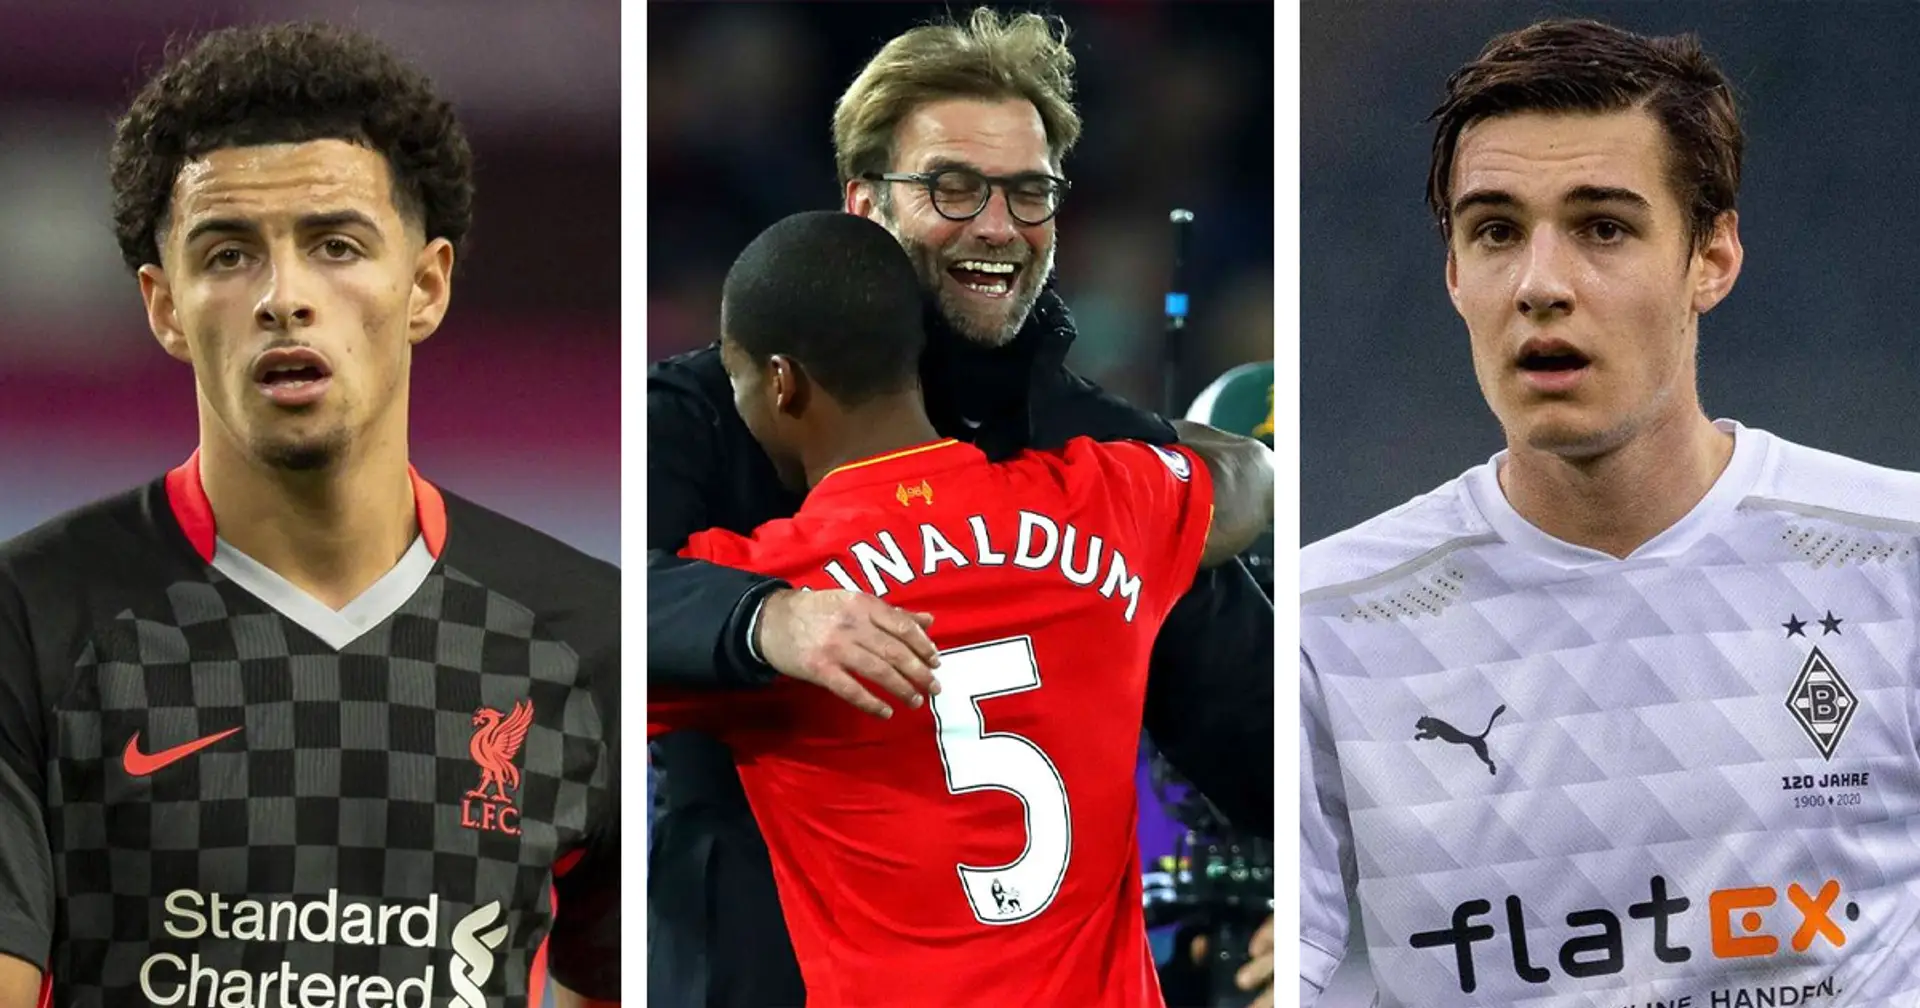 How Liverpool could deal with Wijnaldum exit on transfer market: 4 scenarios with probability ratings